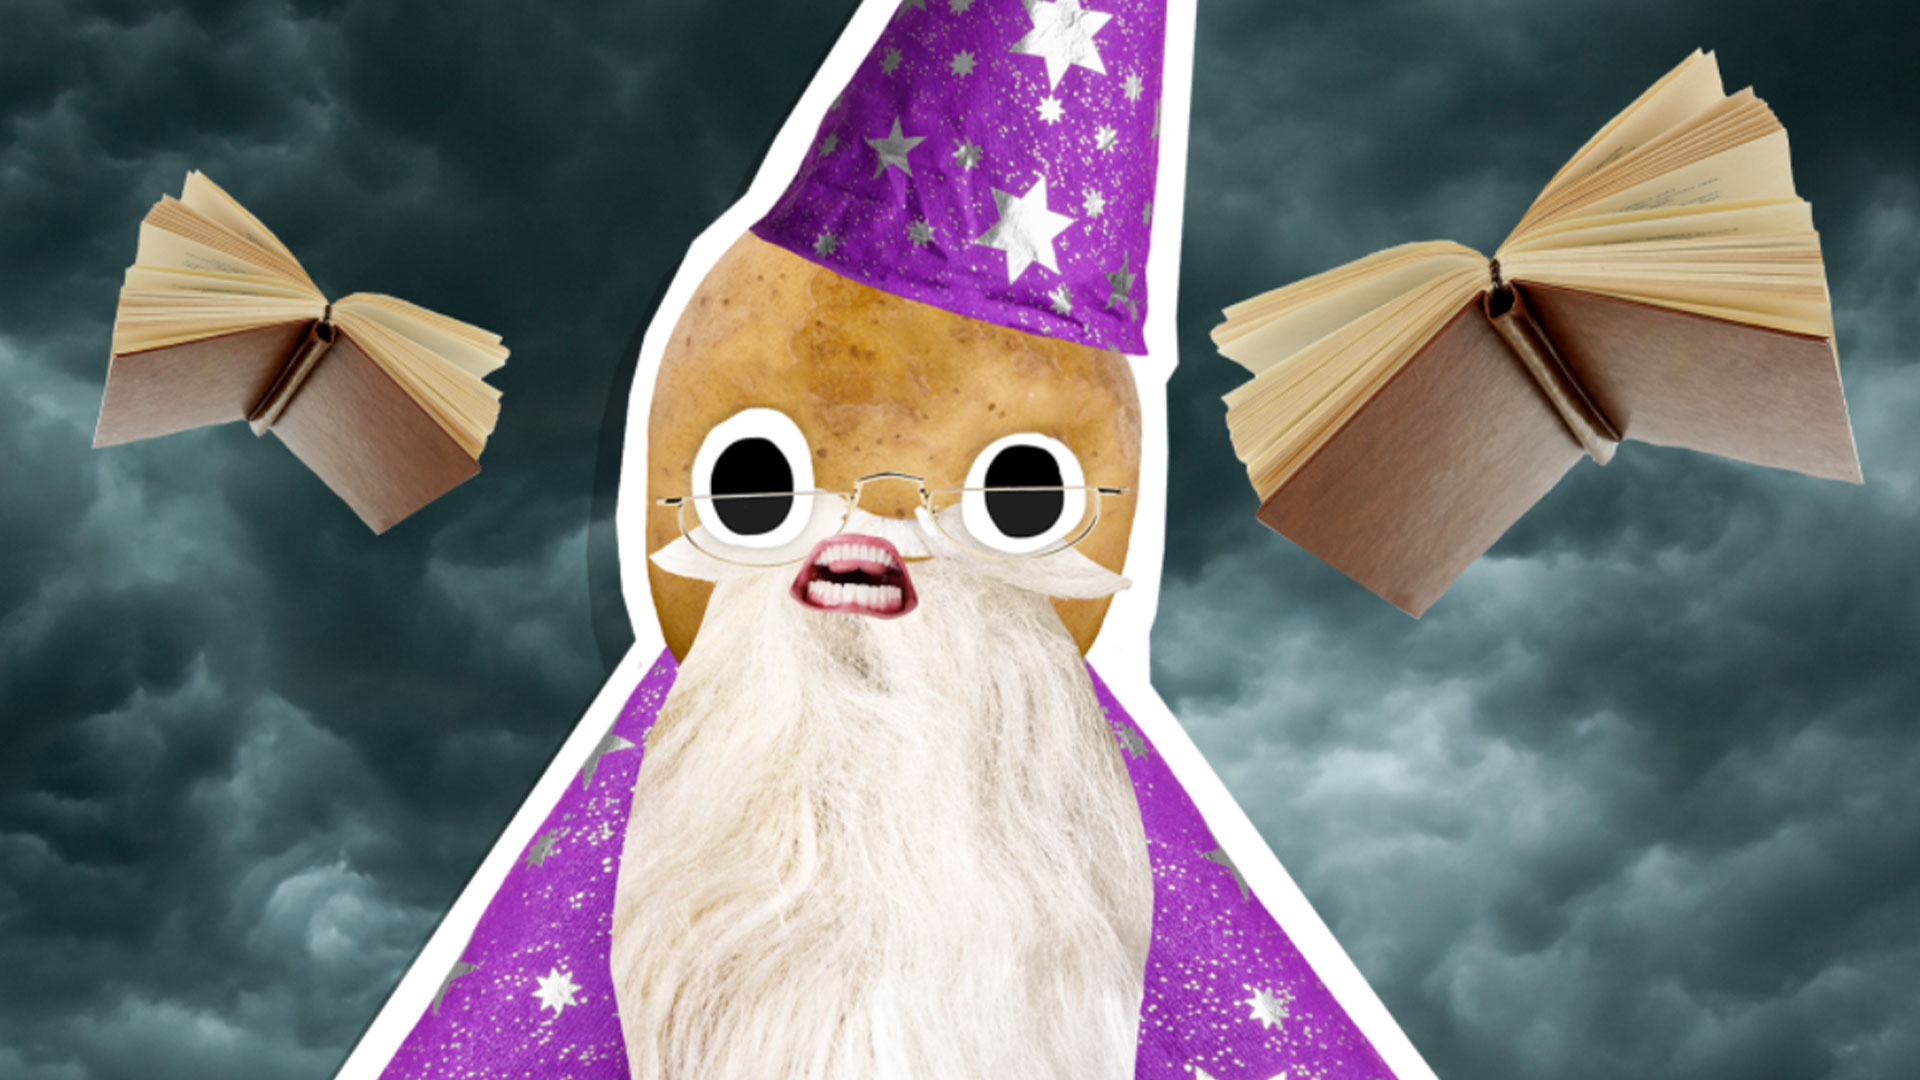 Dumbledore and flying books